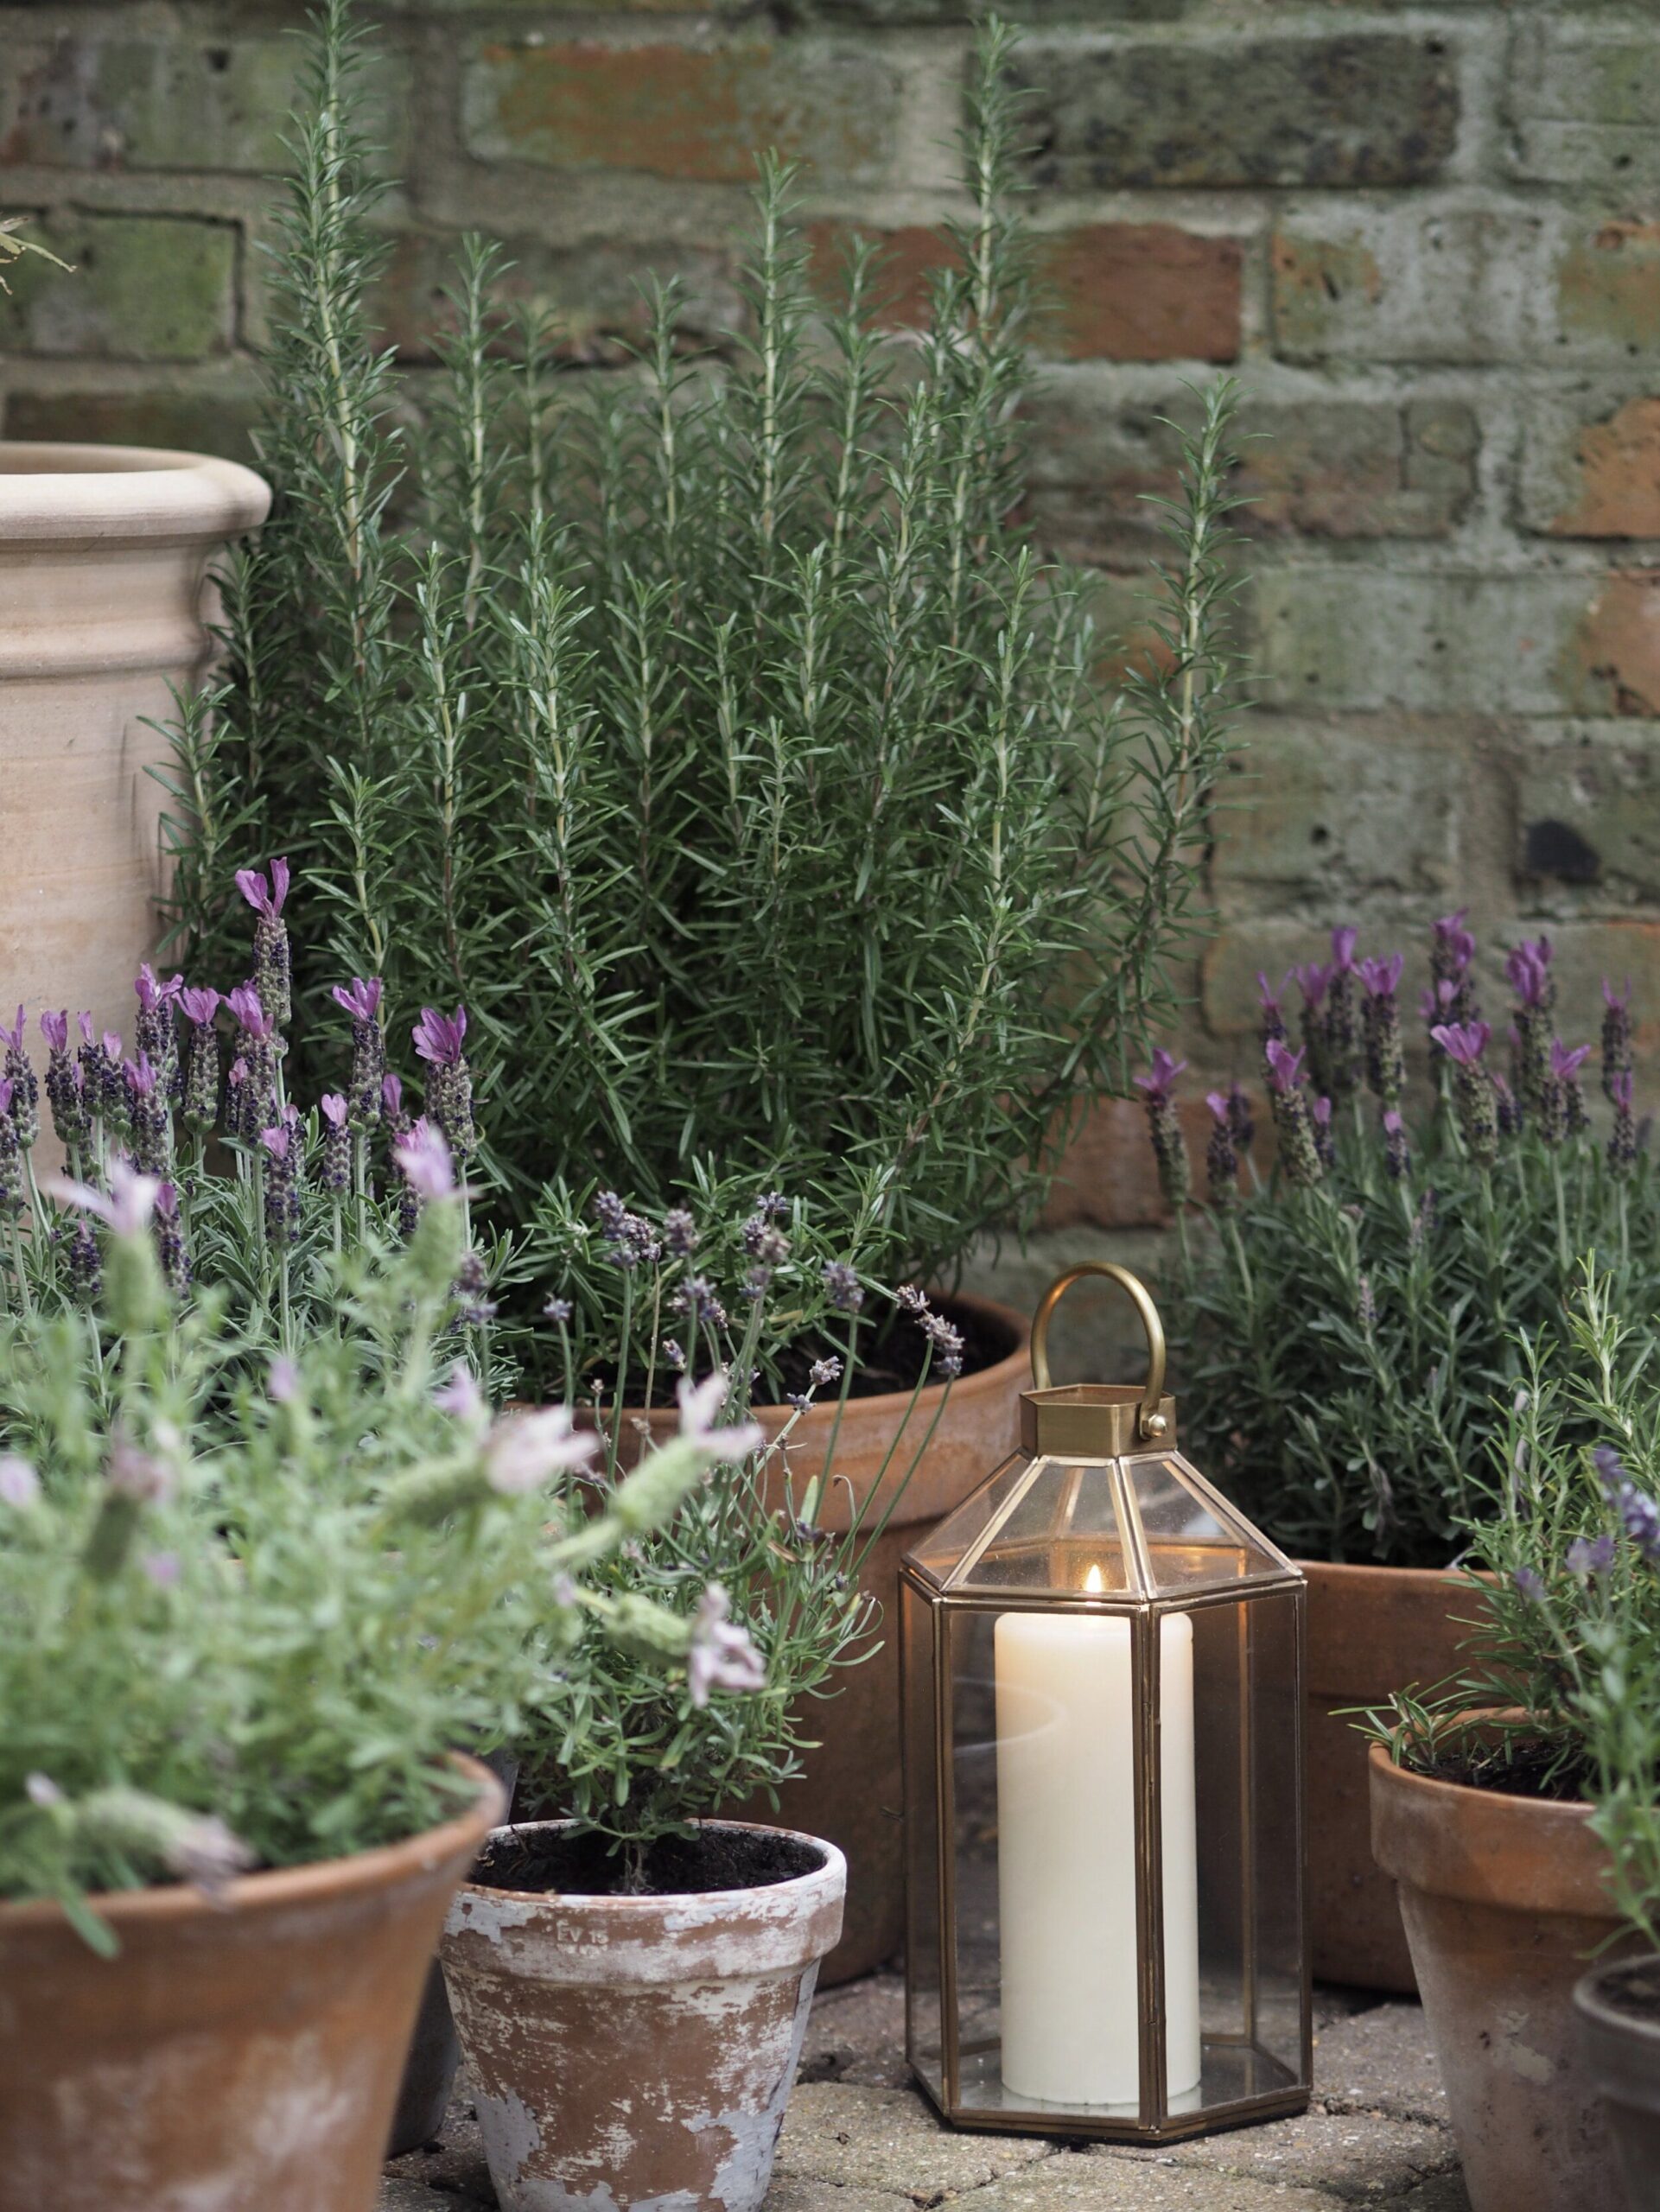 Transform Your Outdoor Space with a Charming Patio Garden